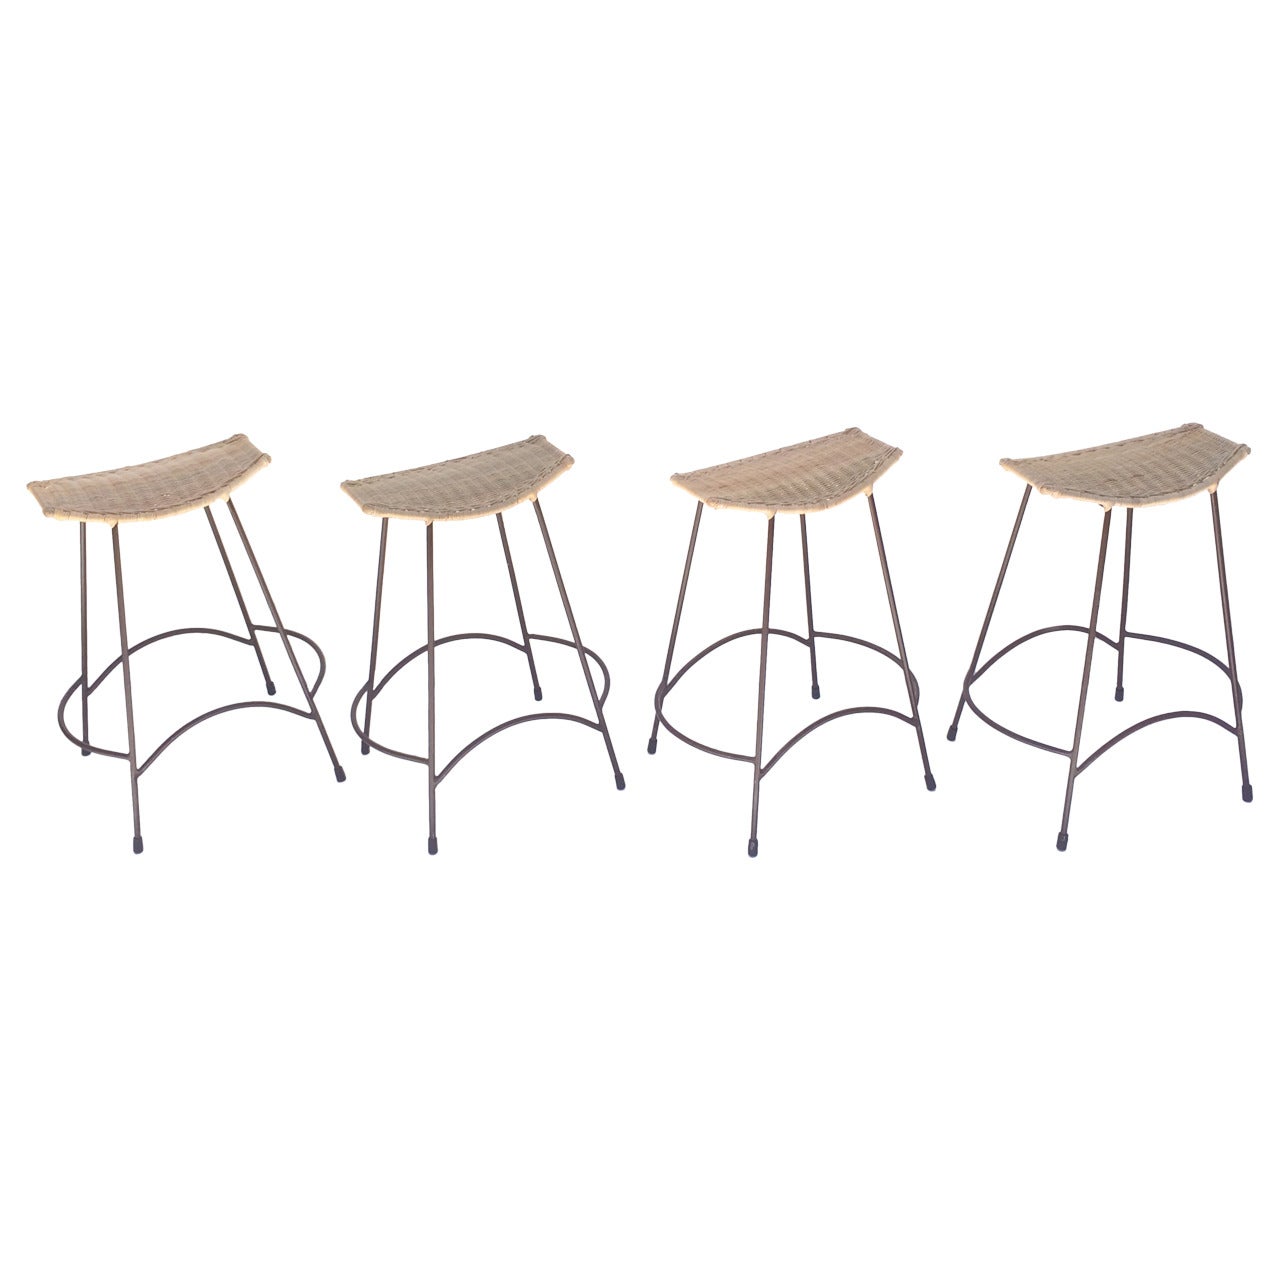 Set of Four Wicker and Painted Steel Stools Designed by Arthur Umanoff